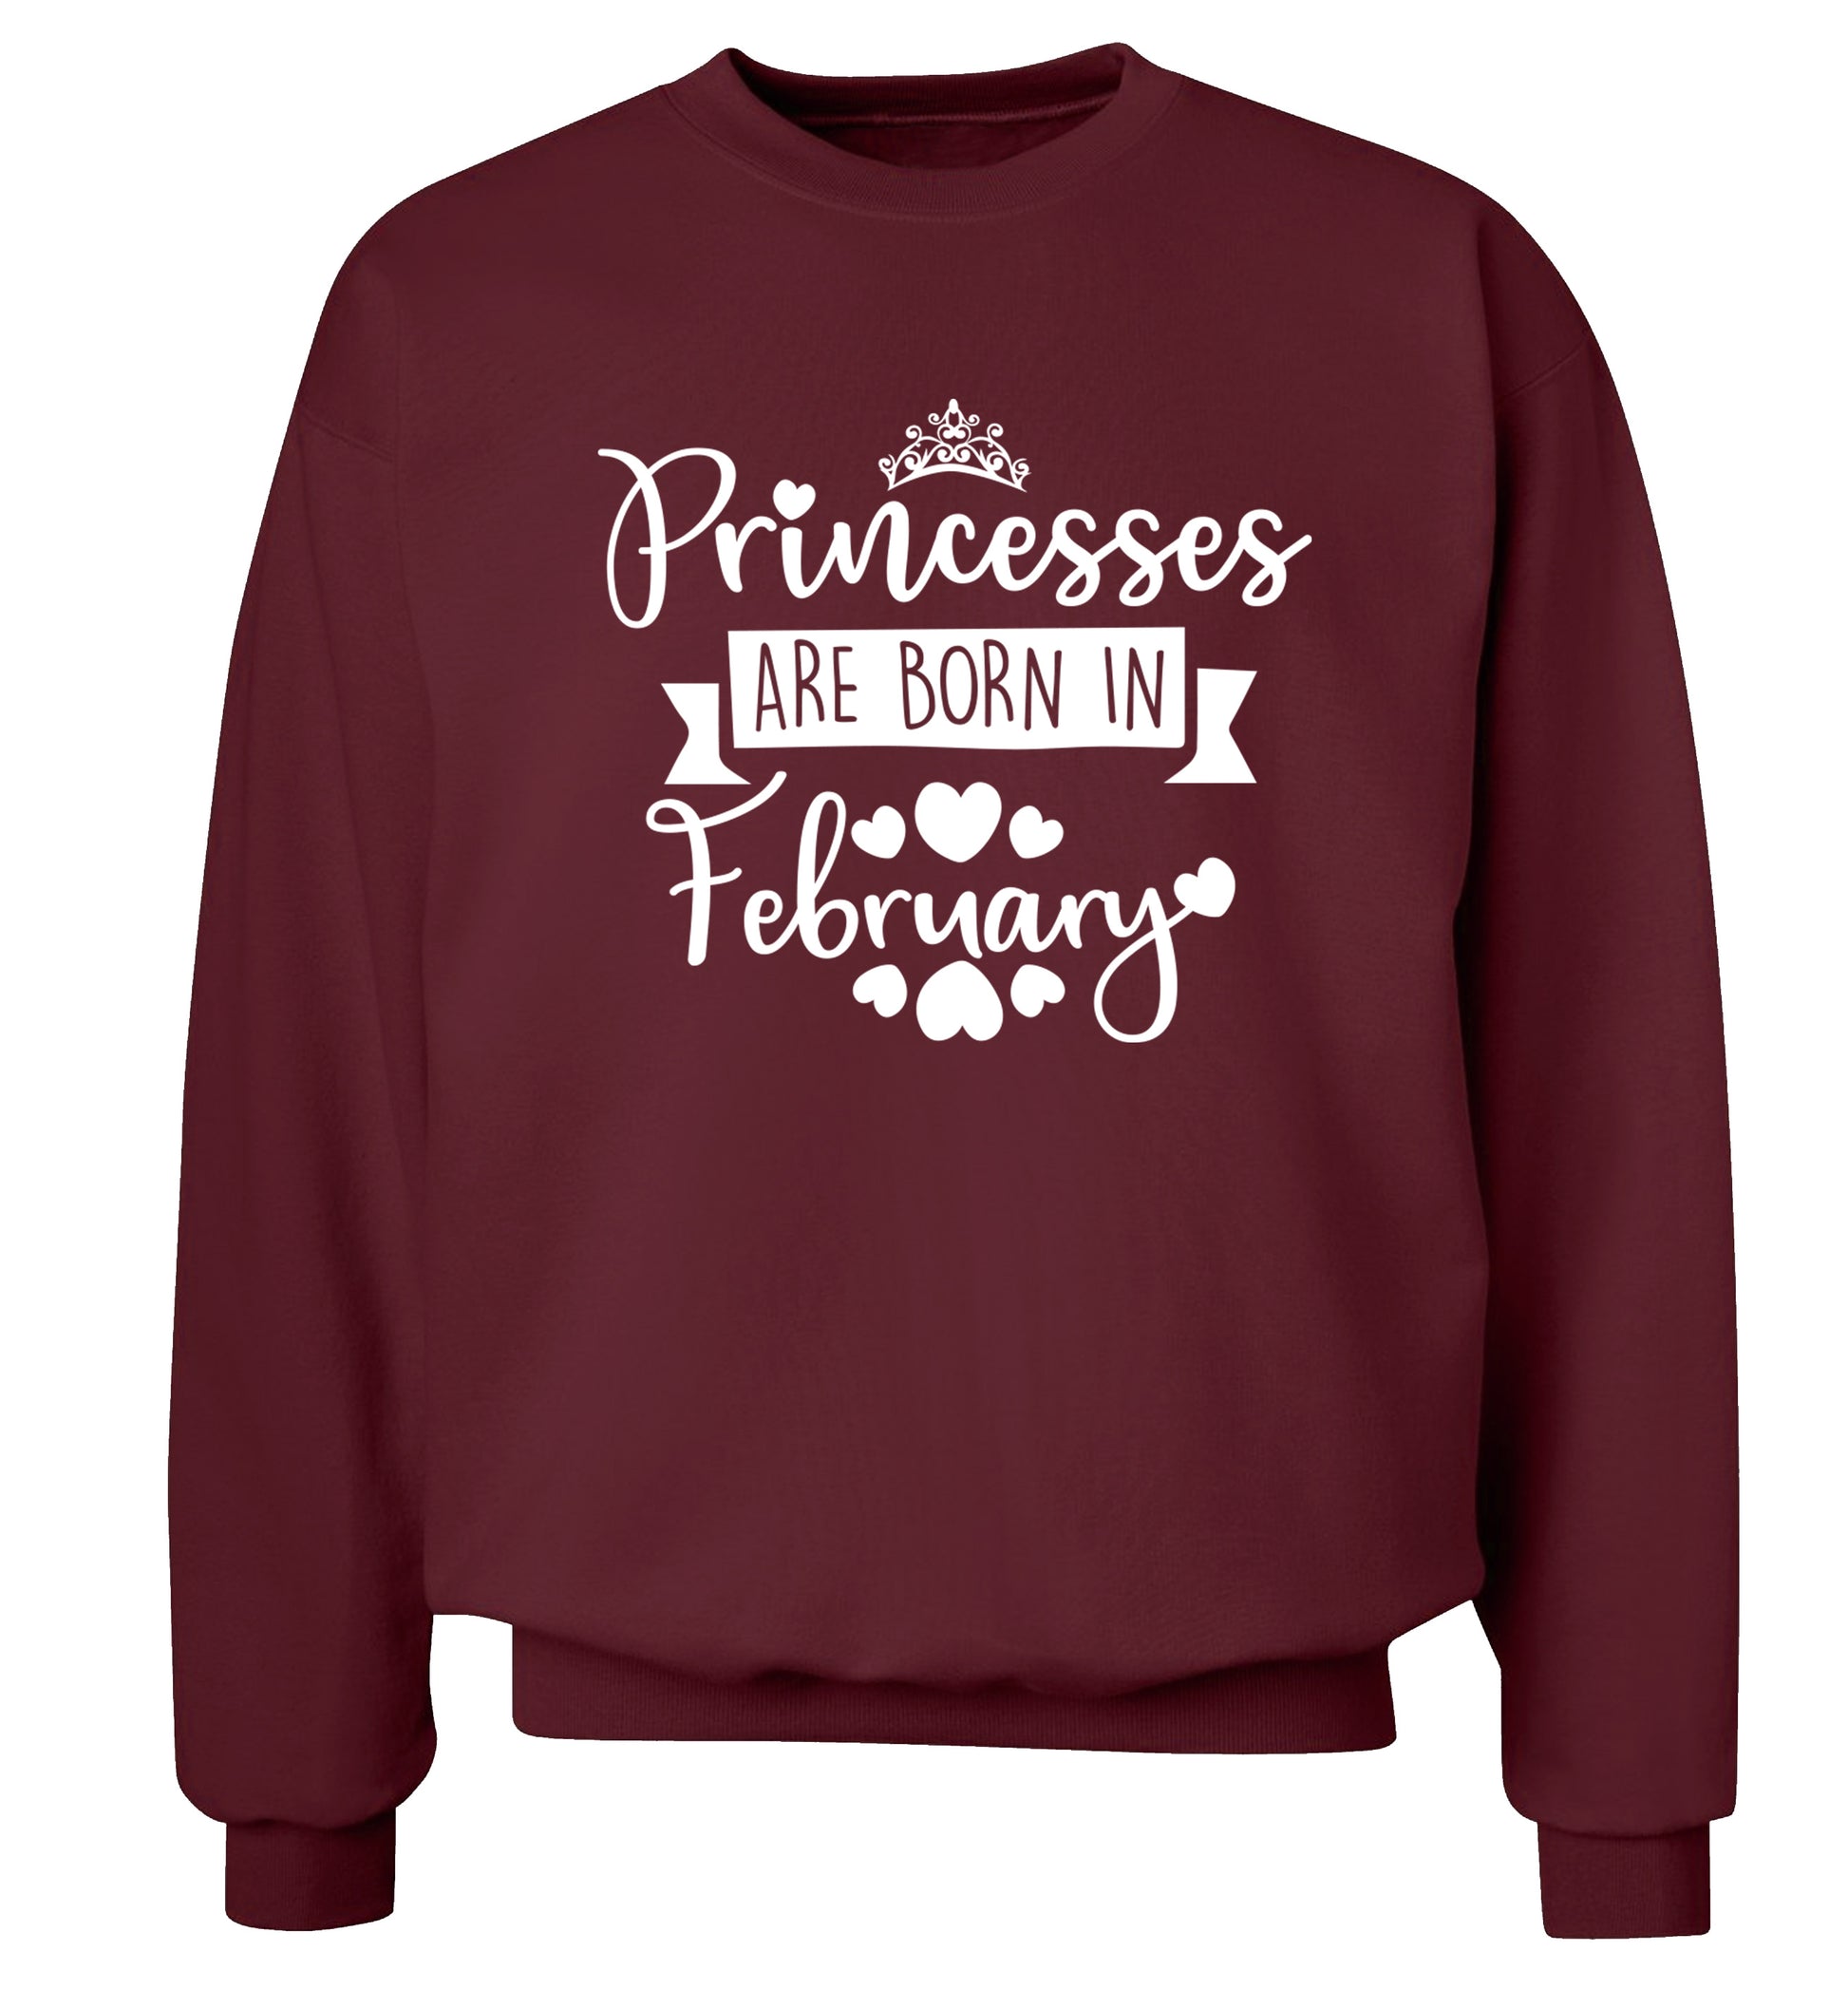 Princesses are born in February Adult's unisex maroon Sweater 2XL